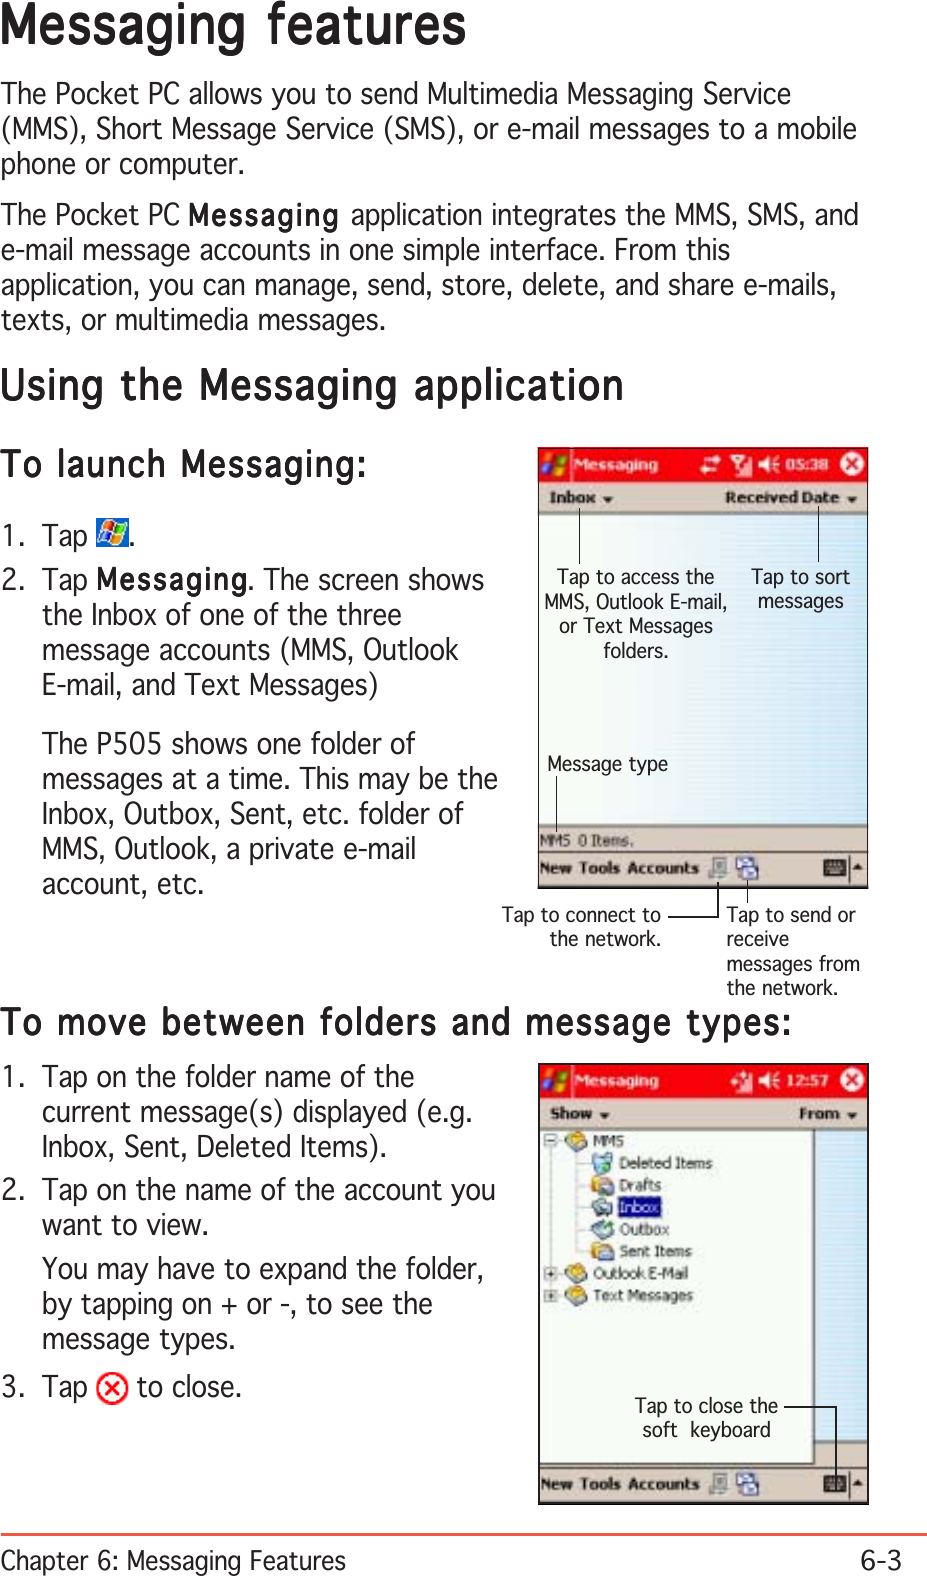 Chapter 6: Messaging Features6-3Messaging featuresMessaging featuresMessaging featuresMessaging featuresMessaging featuresThe Pocket PC allows you to send Multimedia Messaging Service(MMS), Short Message Service (SMS), or e-mail messages to a mobilephone or computer.The Pocket PC MessagingMessagingMessagingMessagingMessaging application integrates the MMS, SMS, ande-mail message accounts in one simple interface. From thisapplication, you can manage, send, store, delete, and share e-mails,texts, or multimedia messages.Using the Messaging applicationUsing the Messaging applicationUsing the Messaging applicationUsing the Messaging applicationUsing the Messaging applicationTo launch Messaging:To launch Messaging:To launch Messaging:To launch Messaging:To launch Messaging:1. Tap  .2. Tap MessagingMessagingMessagingMessagingMessaging. The screen showsthe Inbox of one of the threemessage accounts (MMS, OutlookE-mail, and Text Messages)The P505 shows one folder ofmessages at a time. This may be theInbox, Outbox, Sent, etc. folder ofMMS, Outlook, a private e-mailaccount, etc.To move between folders and message types:To move between folders and message types:To move between folders and message types:To move between folders and message types:To move between folders and message types:Tap to access theMMS, Outlook E-mail,or Text Messagesfolders.Tap to send orreceivemessages fromthe network.Tap to connect tothe network.Tap to sortmessagesMessage typeTap to close thesoft  keyboard1. Tap on the folder name of thecurrent message(s) displayed (e.g.Inbox, Sent, Deleted Items).2. Tap on the name of the account youwant to view.You may have to expand the folder,by tapping on + or -, to see themessage types.3. Tap   to close.